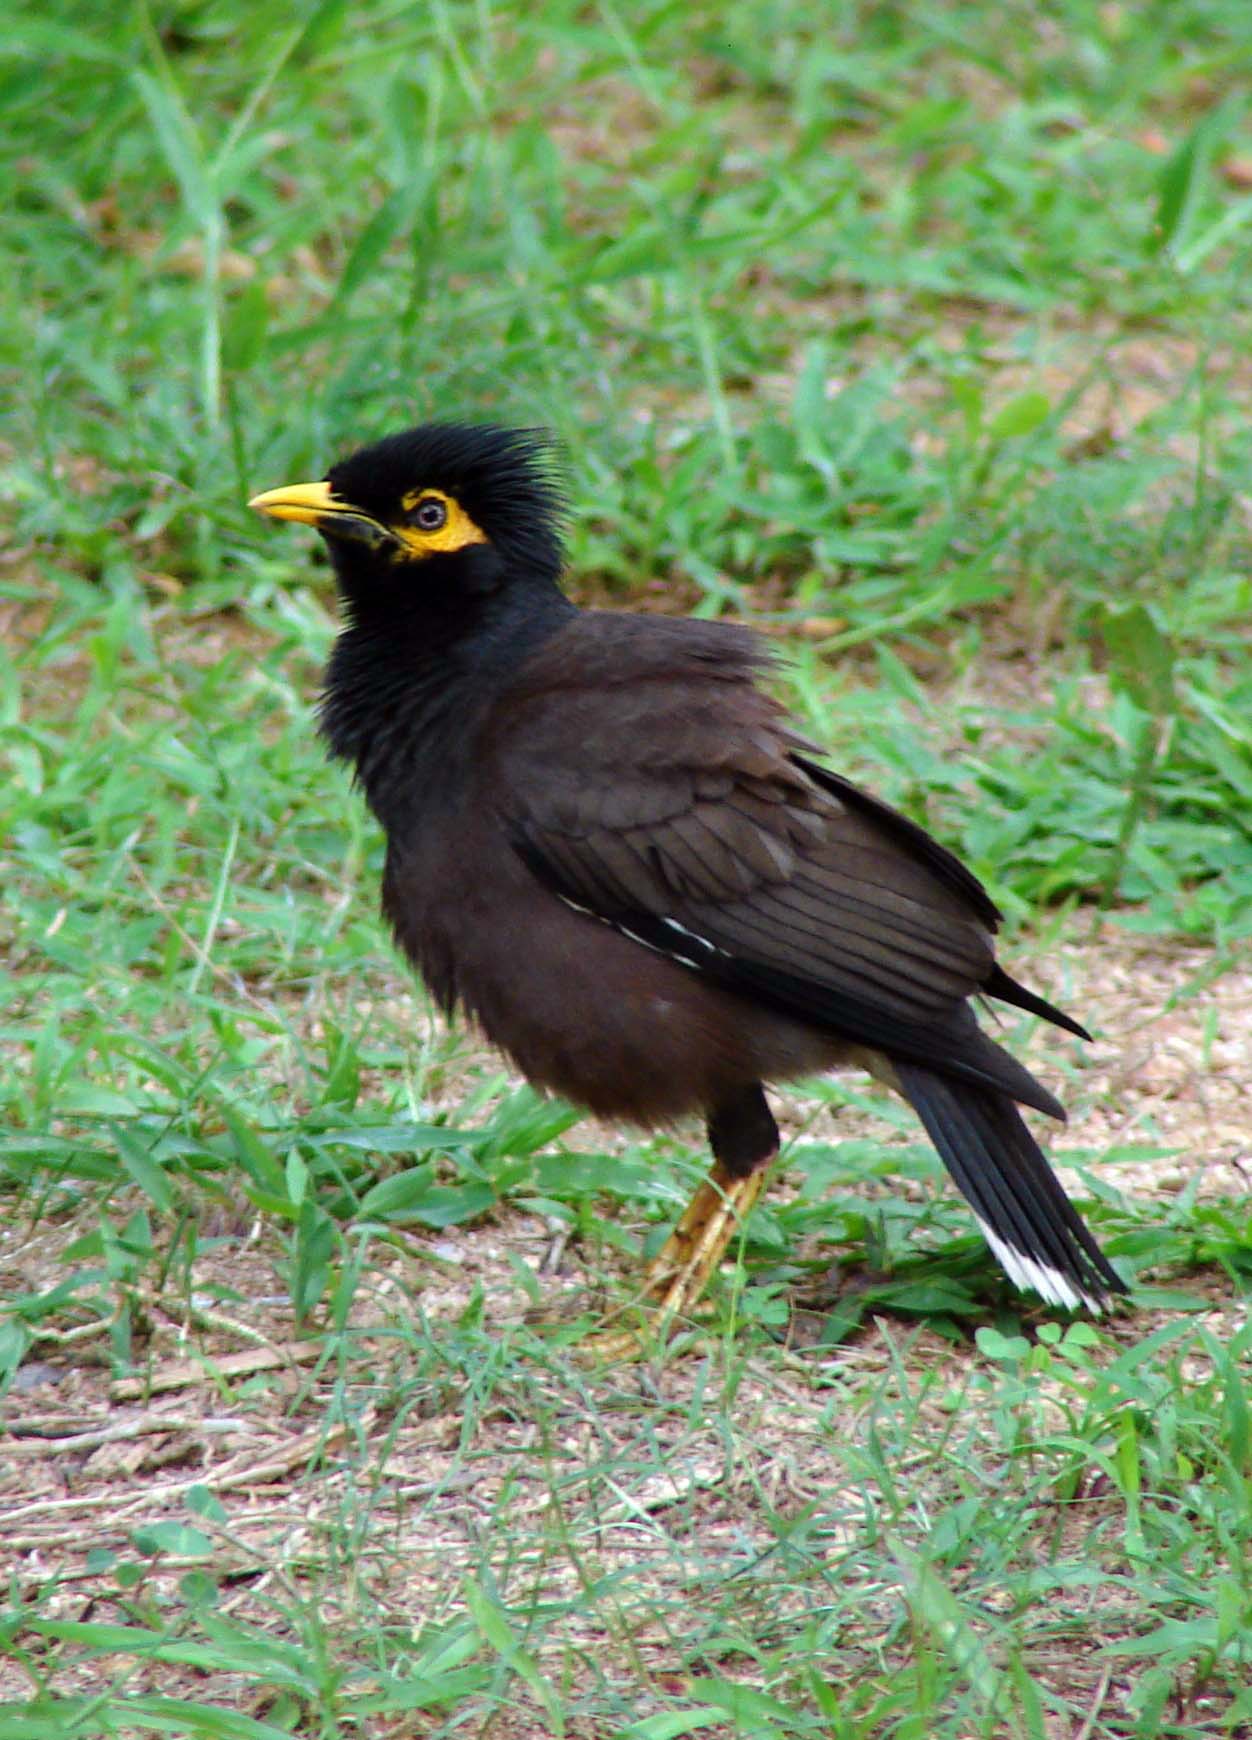 a black bird standing on the grass in the wild